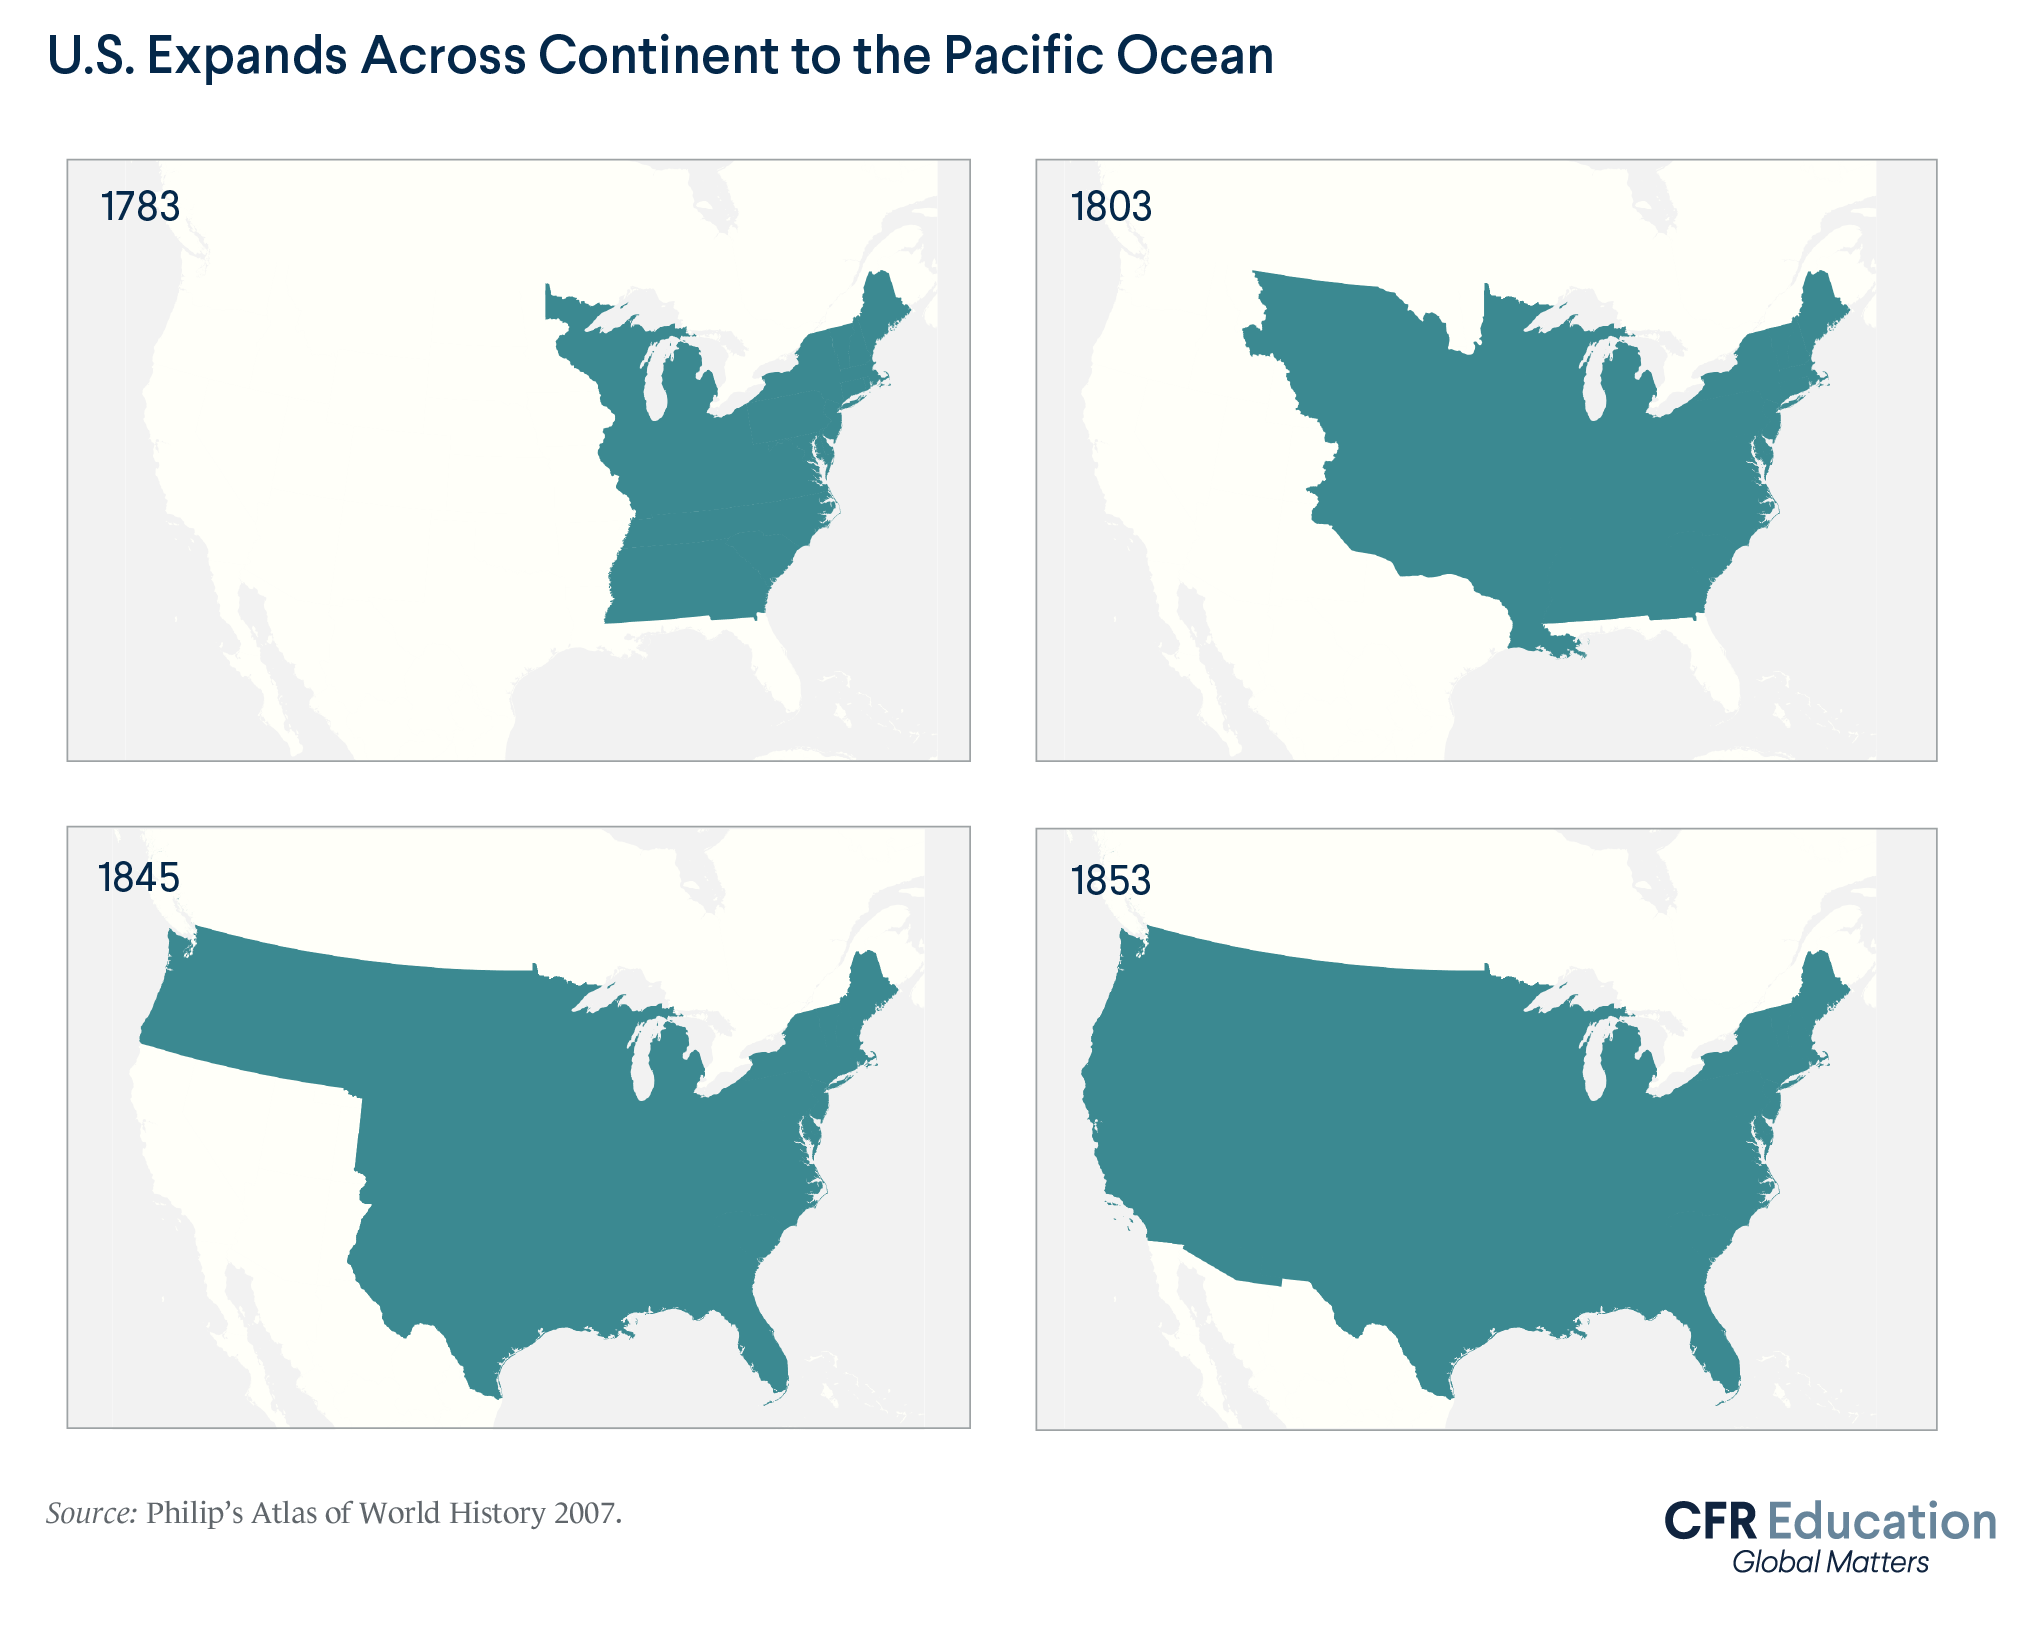 These four maps show how the United States expanded across the continent to the Pacific Ocean. For more info contact us at cfr_education@cfr.org.